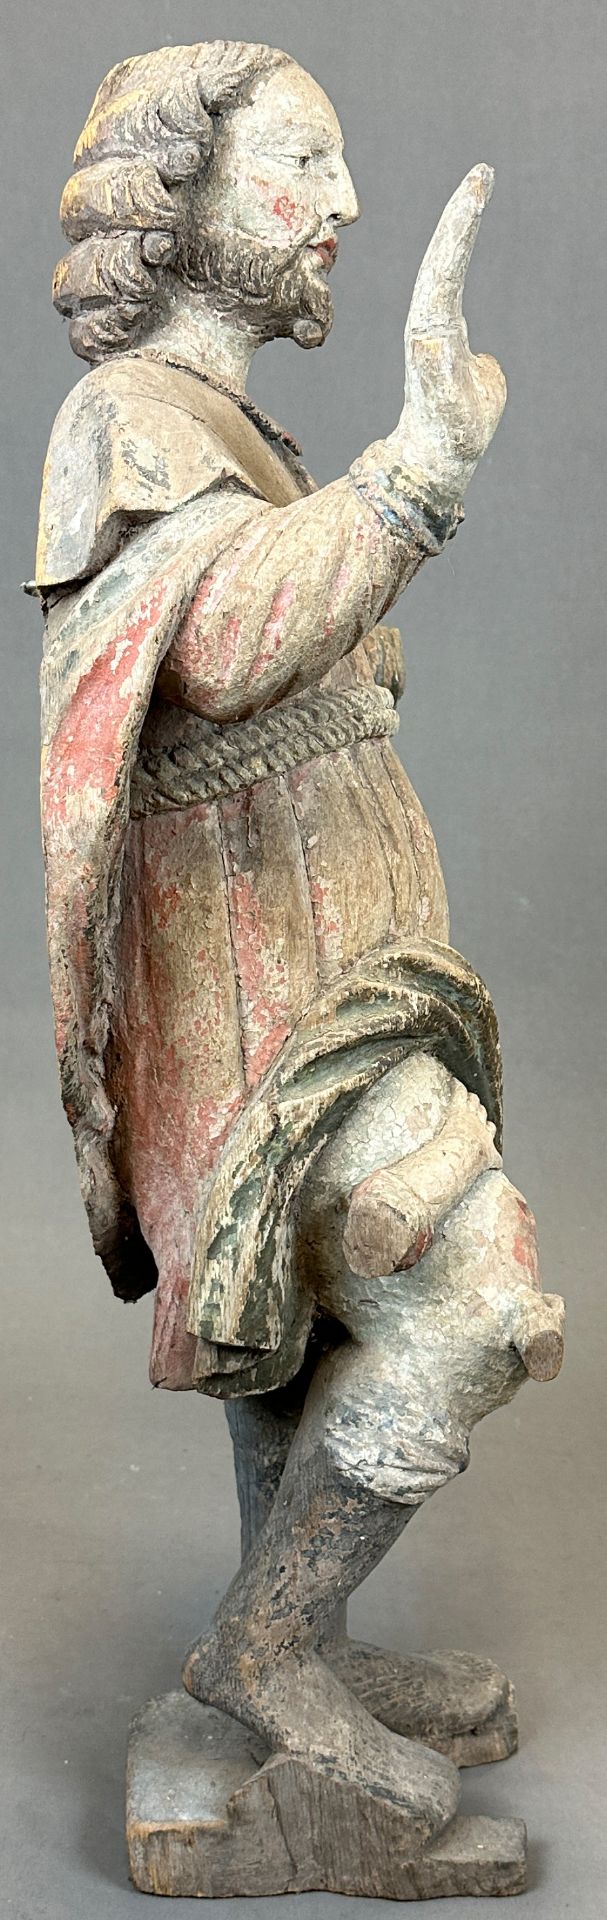 Wall figure. St Roch of Montpellier. Late Gothic. Around 1500. Ulm. - Image 4 of 11